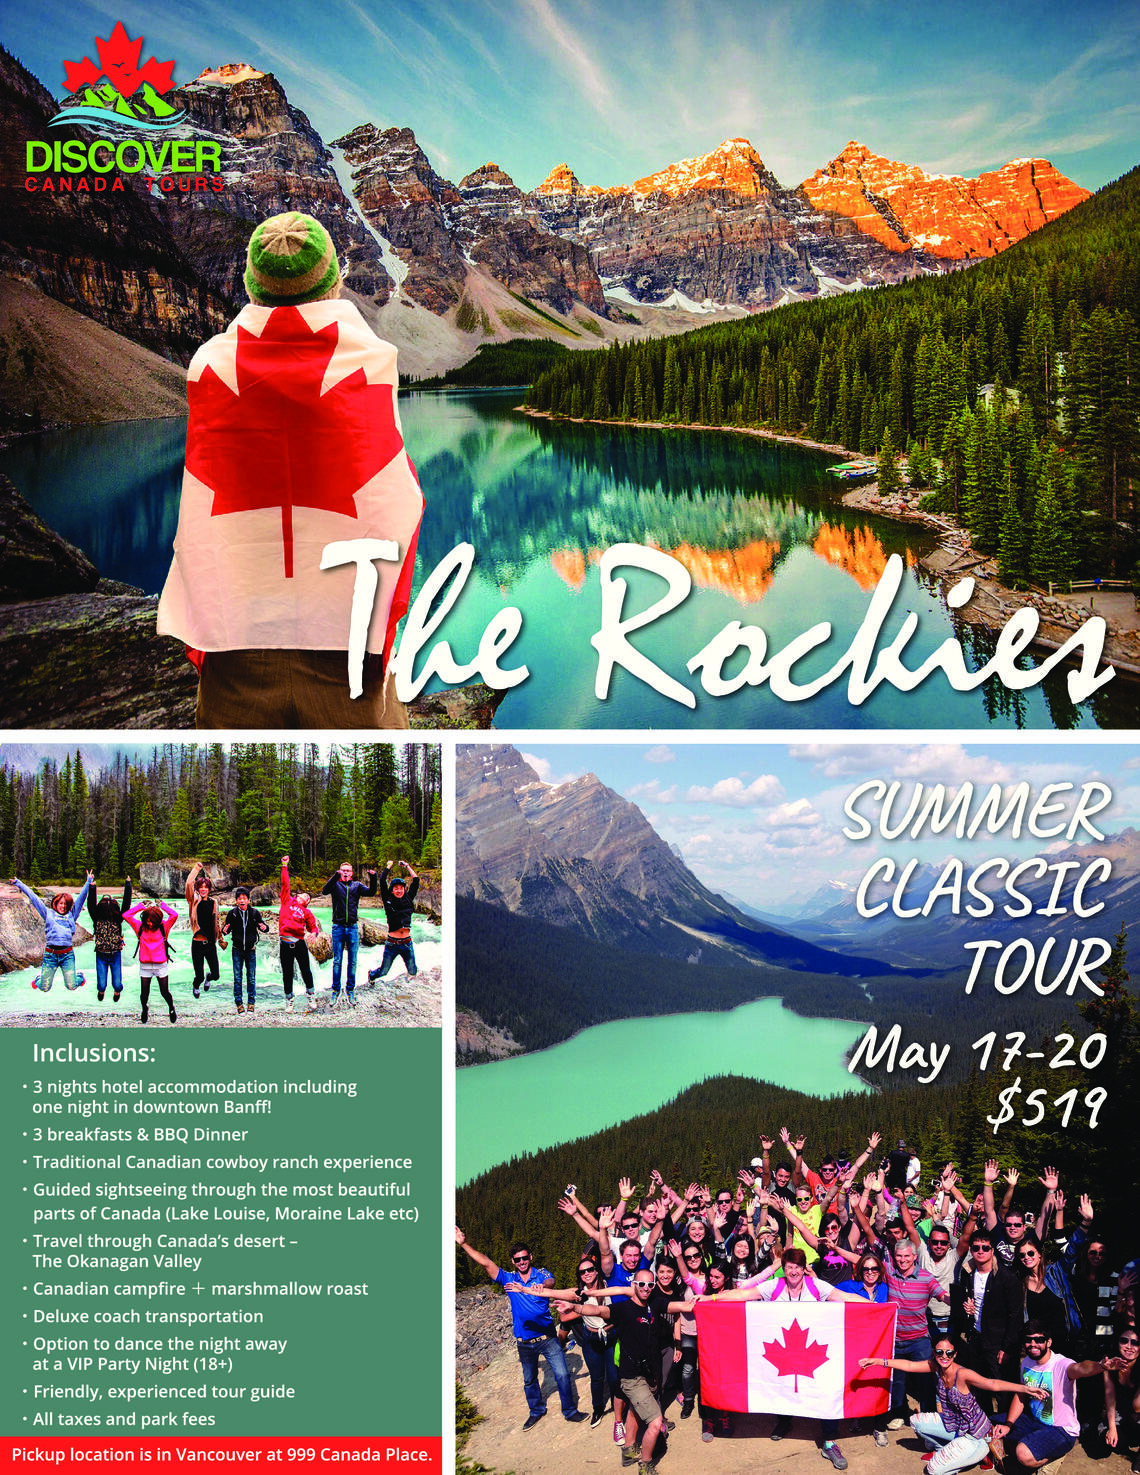 Discover Canada Tours - Canadian Rockies Summer Classic Tour